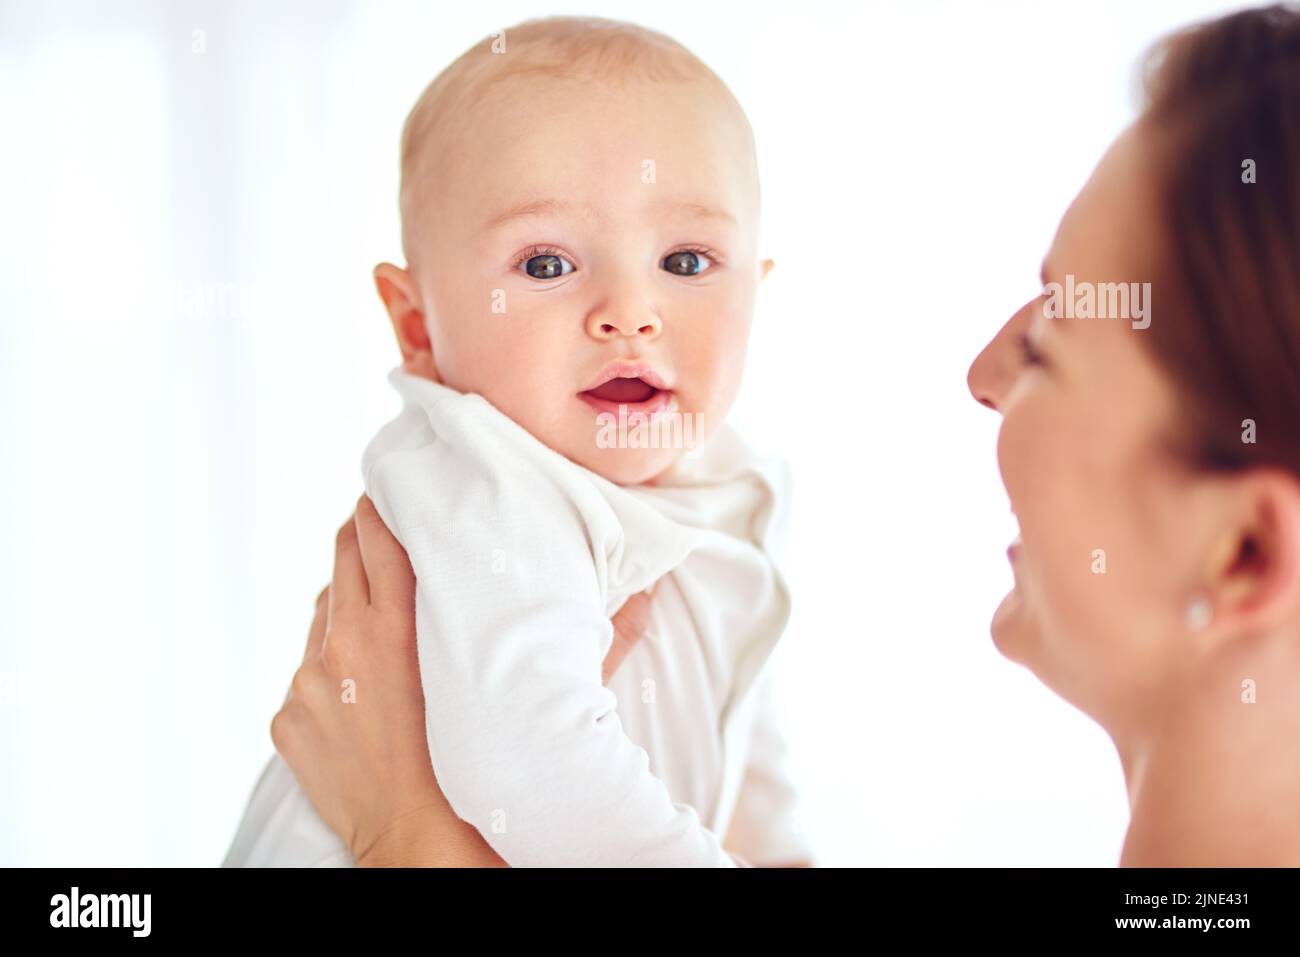 Cute and innocent newborn baby boy bonding with his mom together as a family in studio isolated on a white background. Newborn male child in the hands Stock Photo